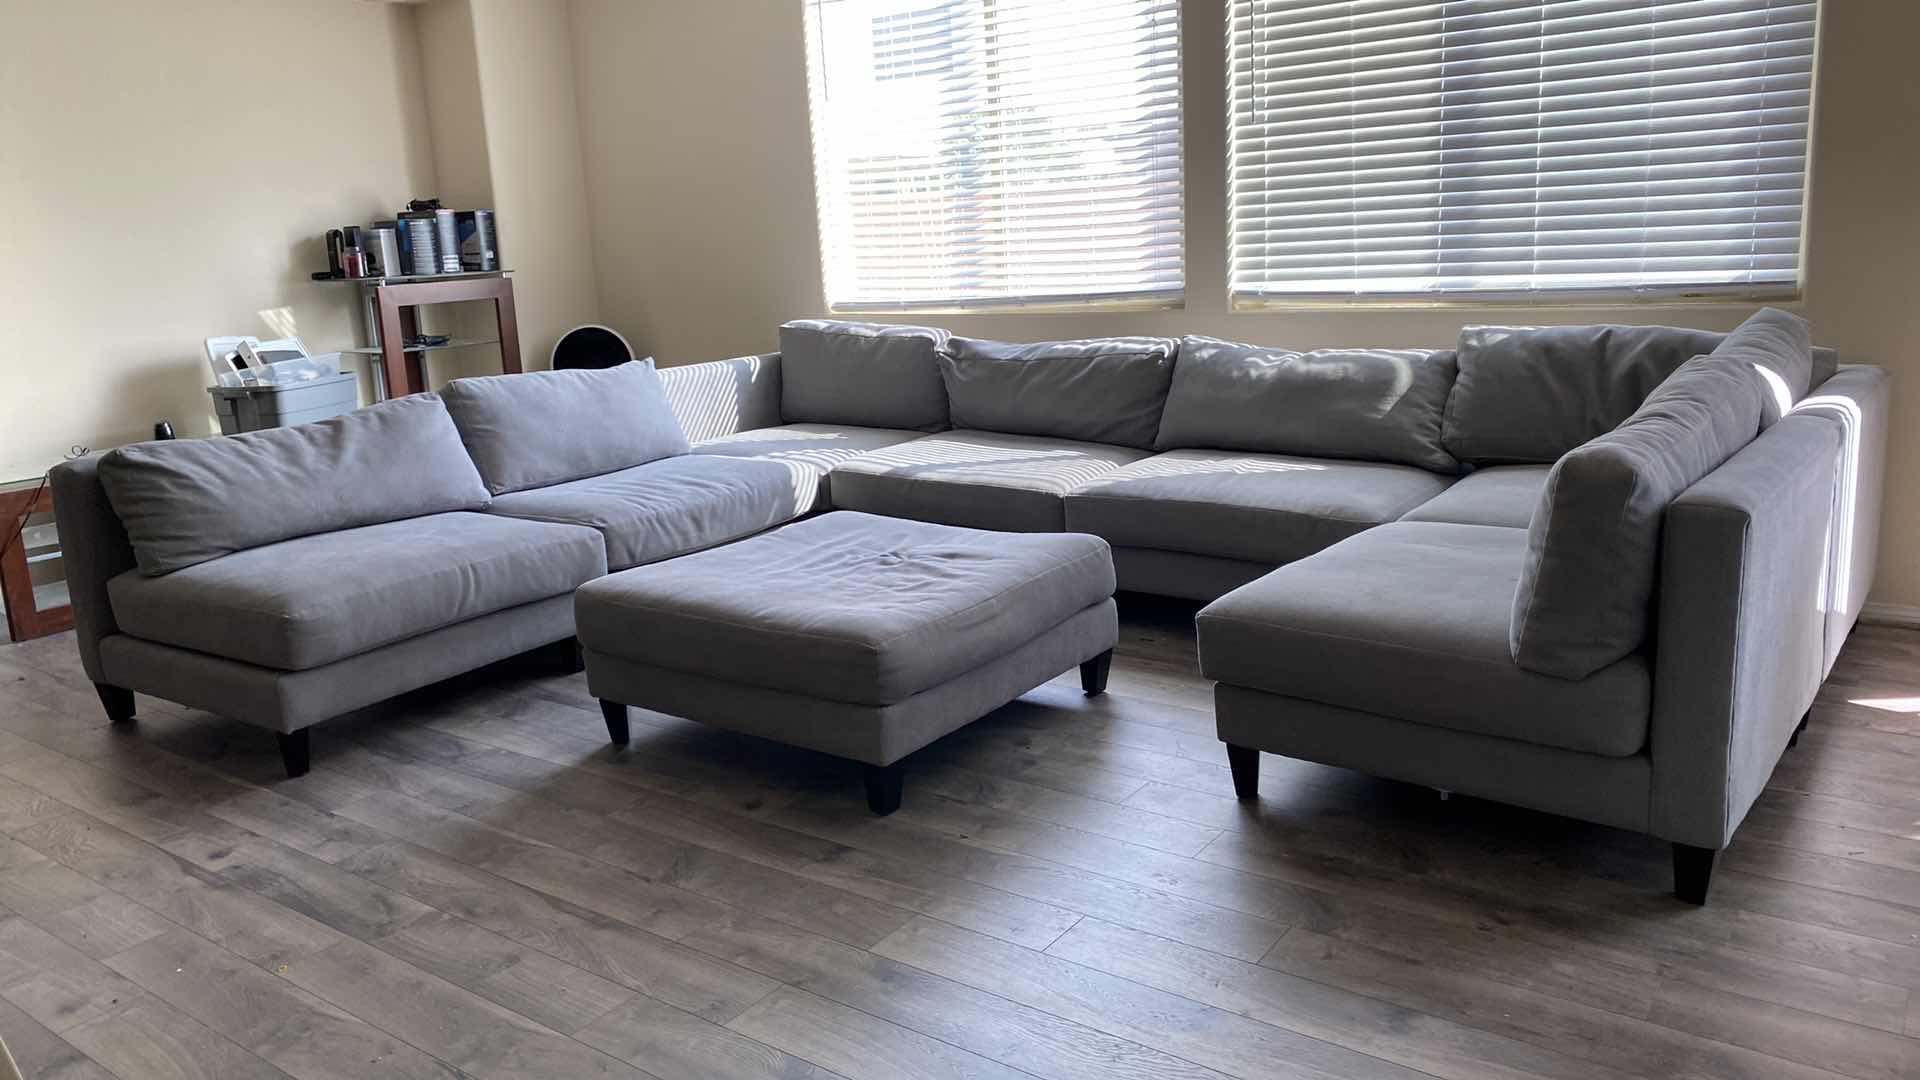 Photo 1 of 7 PIECE SECTIONAL GRAY FABRIC SOFA, CAN BE ARRANGED MULTIPLE WAYS EACH PIECE 40” x 40” H 30”, FABRIC COCKTAIL TABLE 40 1/2” x 40 1/2”